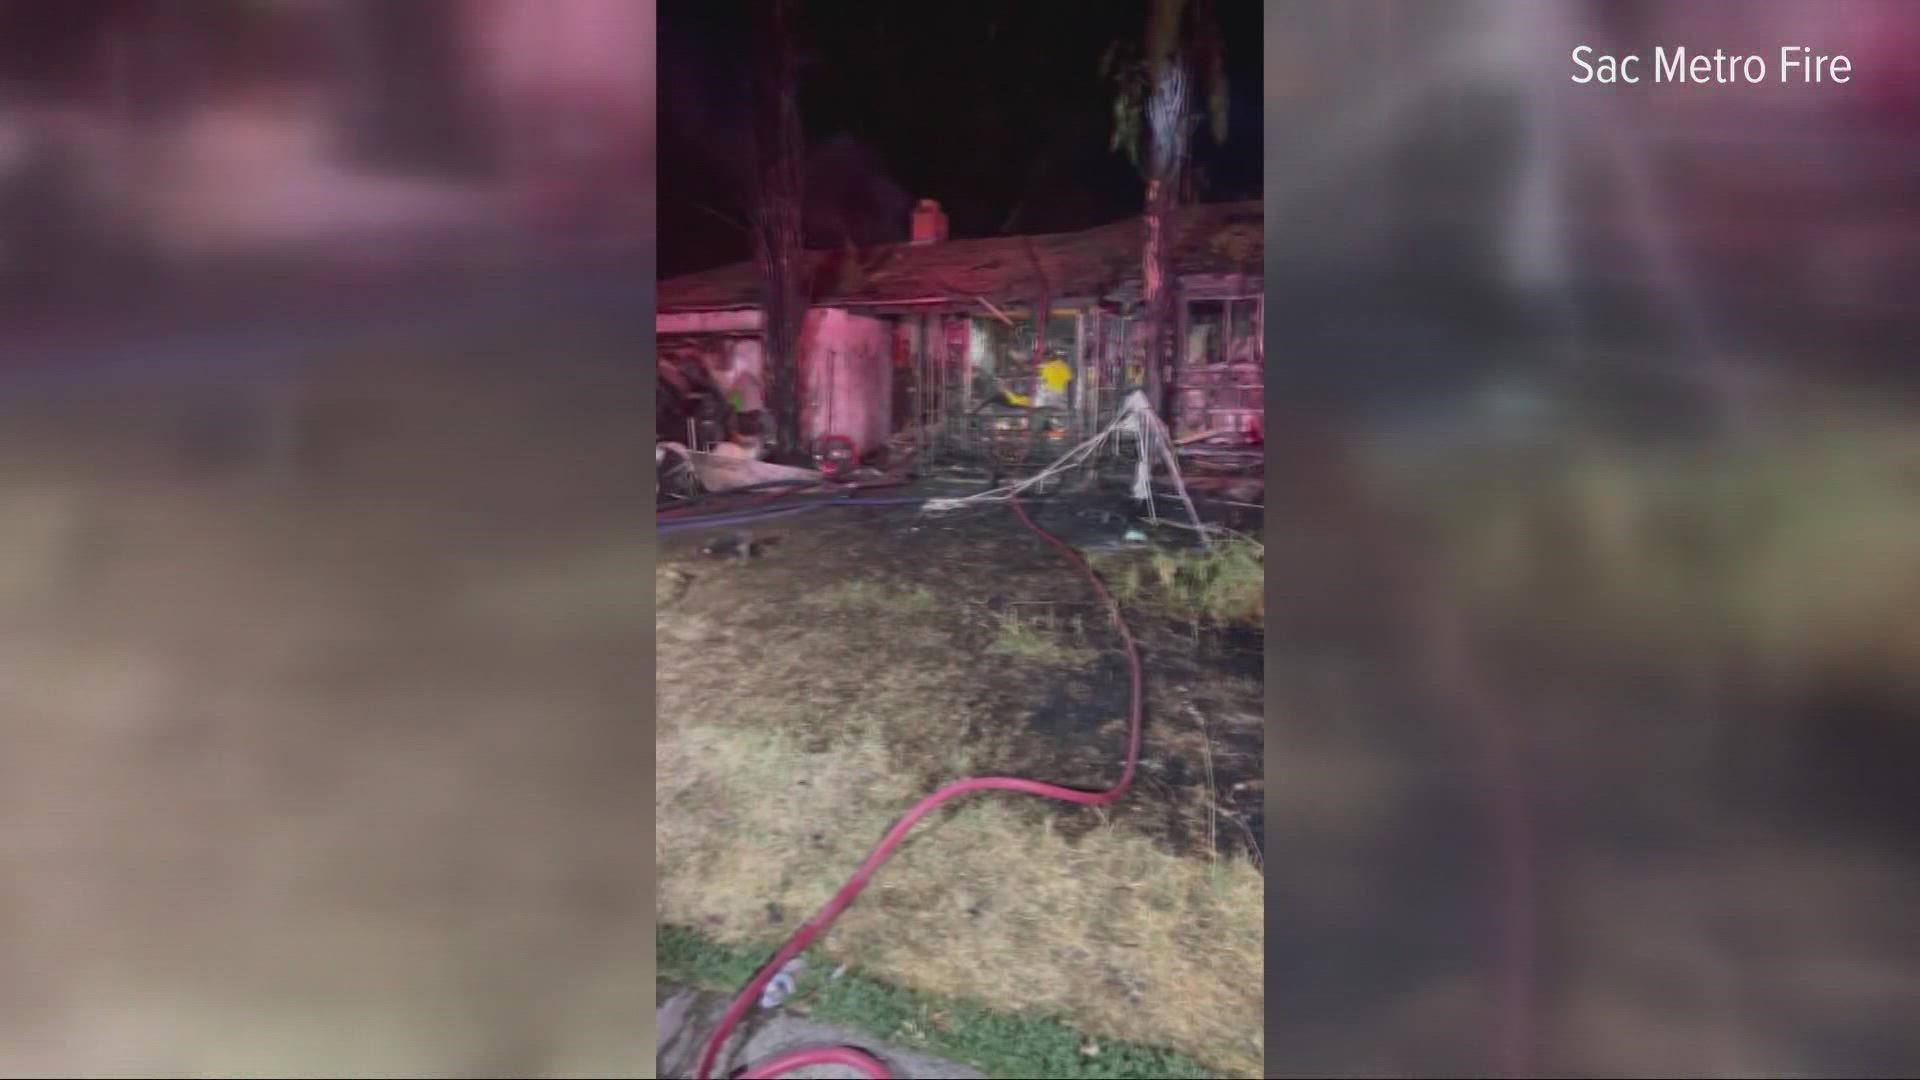 Eleven people who are family and extended family were displaced because of the fire, according to Sacramento Metropolitan Fire District.